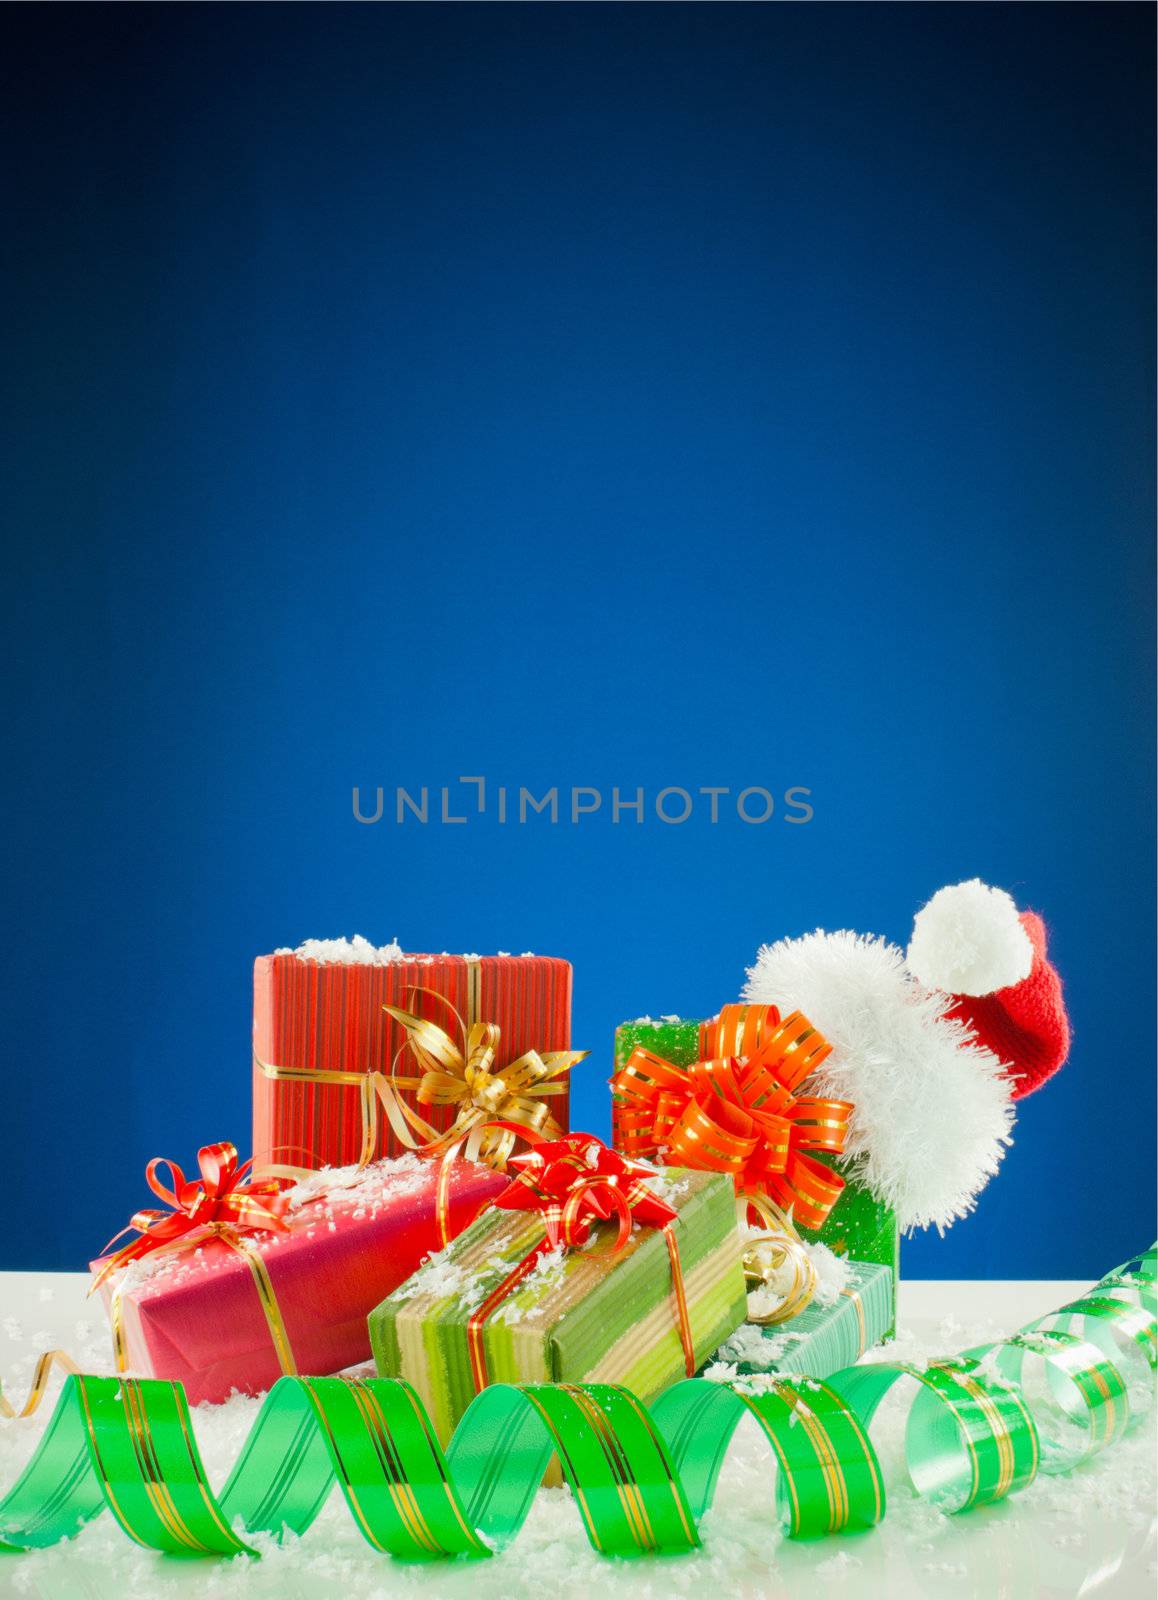 Christmas presents against blue background